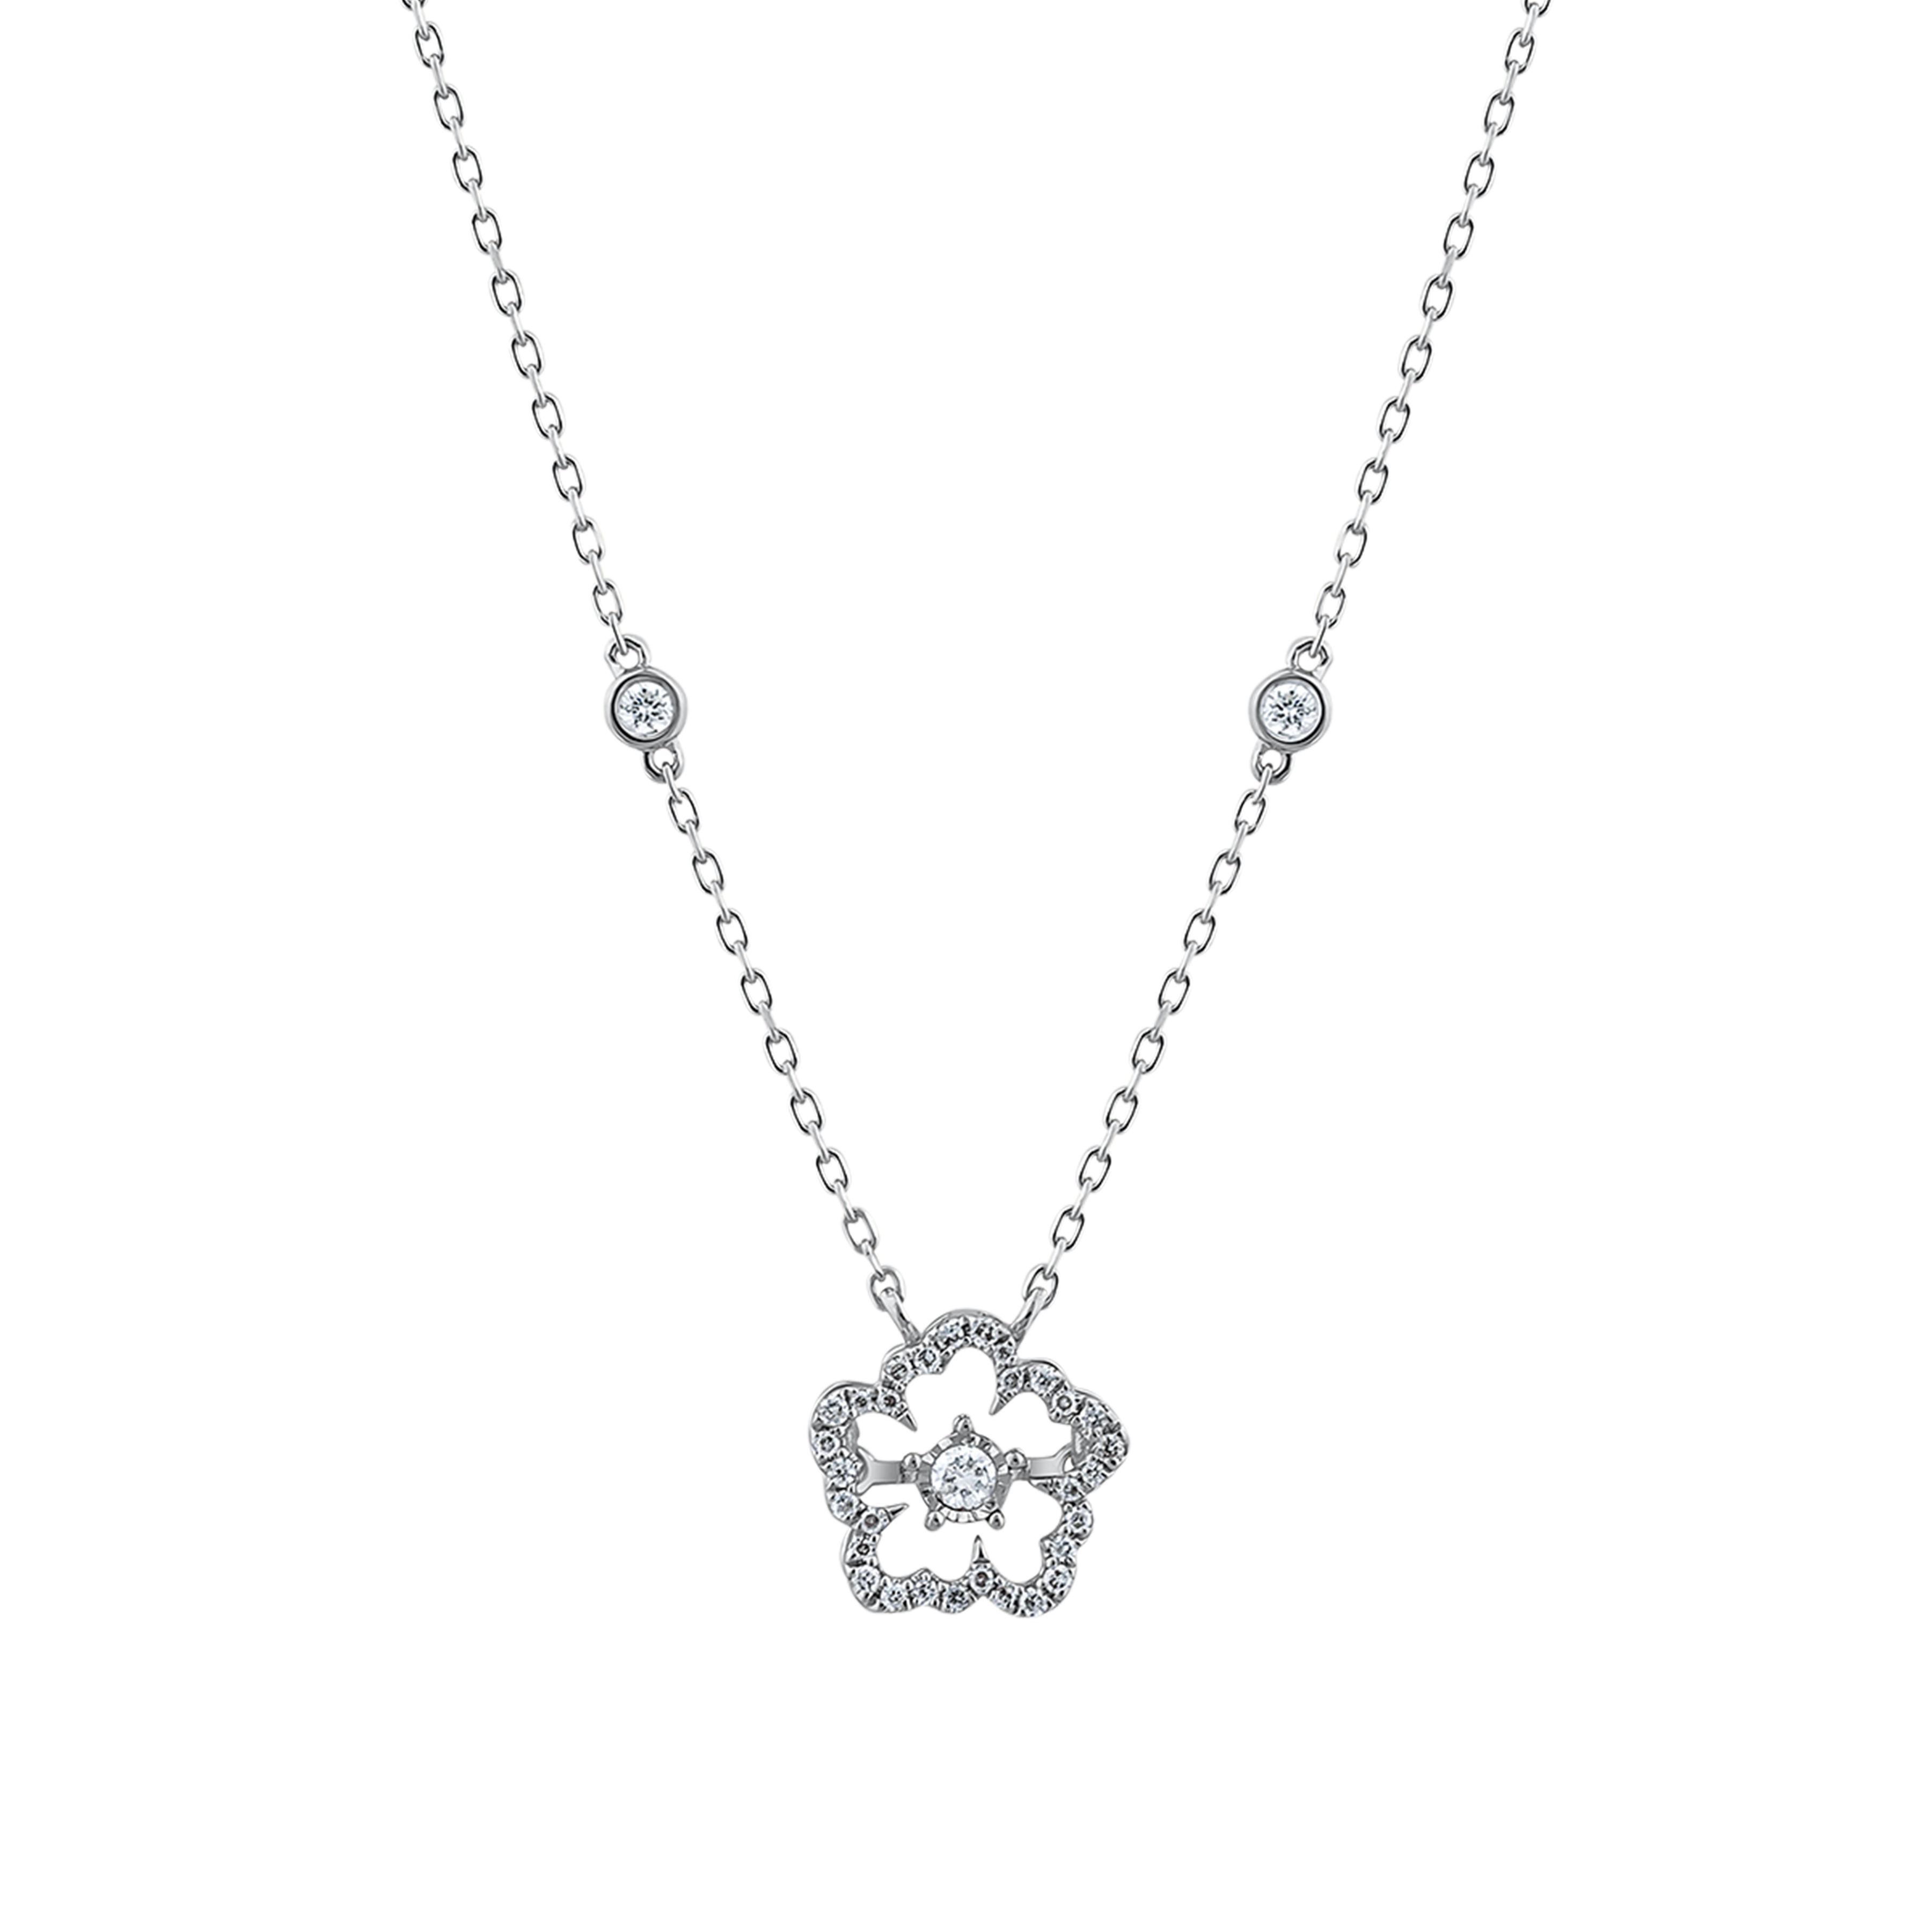 Dancing Diamond White Gold Necklace